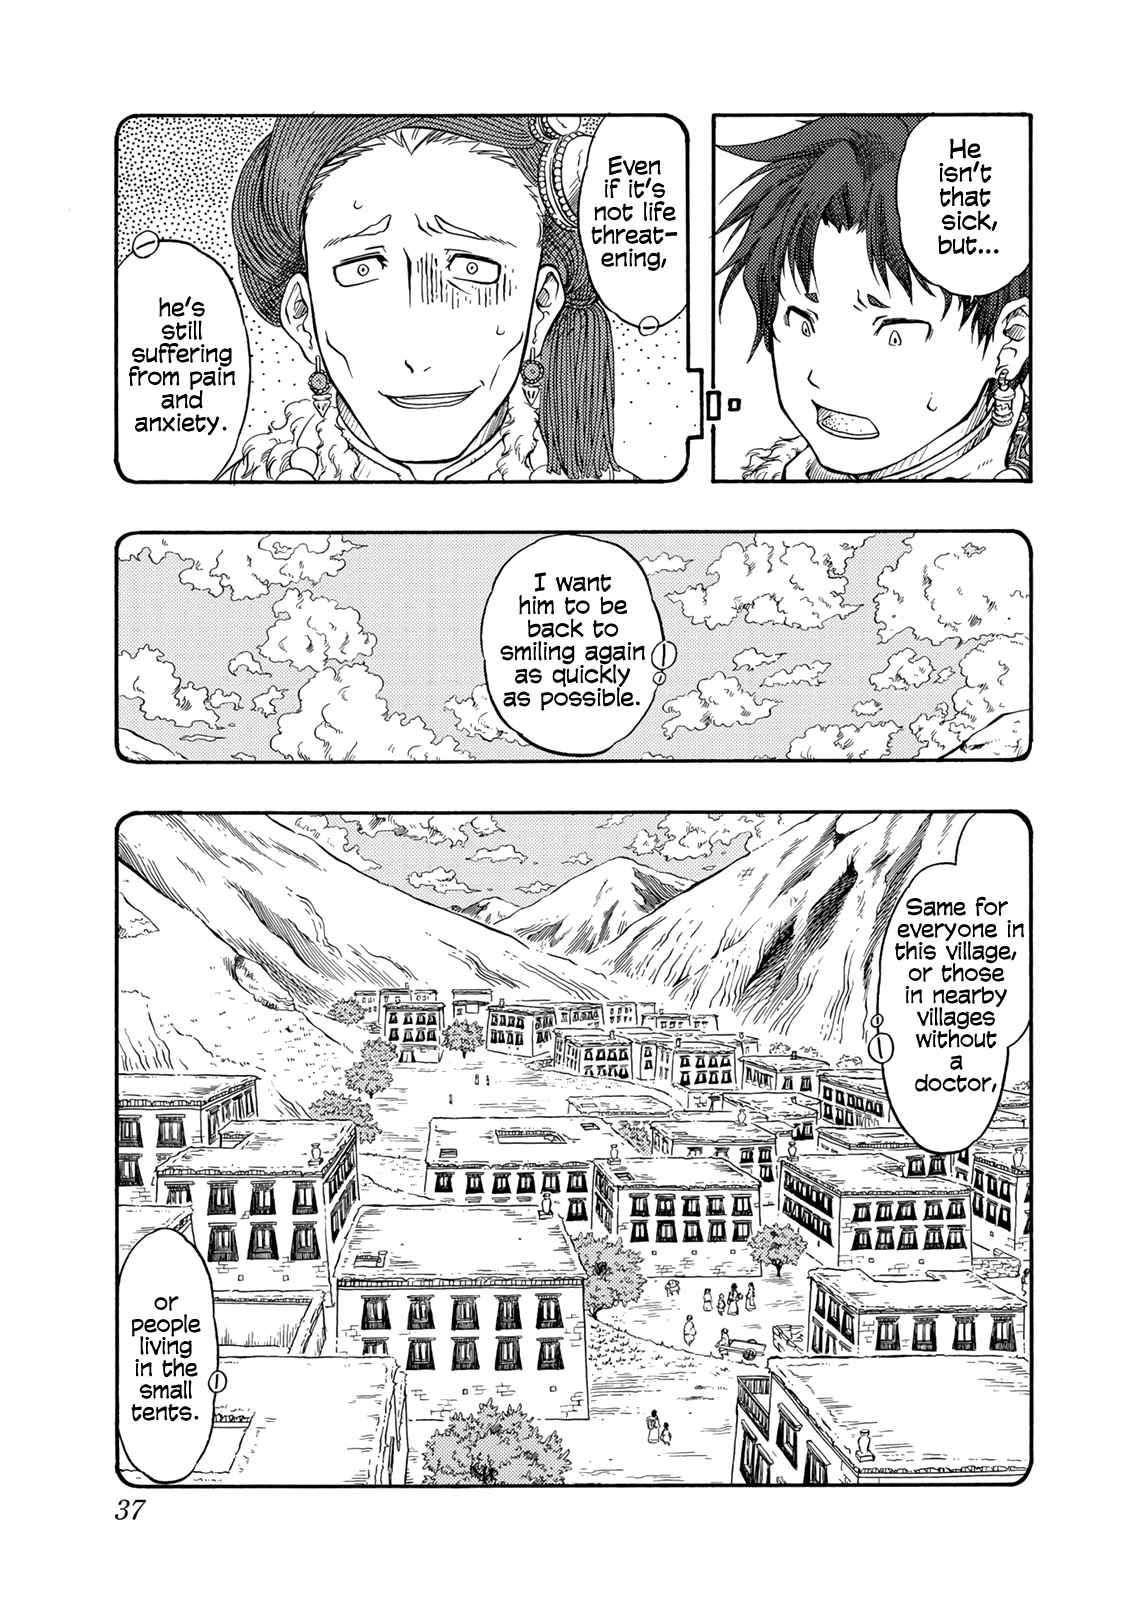 Tenju no Kuni Vol. 1 Ch. 1 A Bride From A Foreign Land